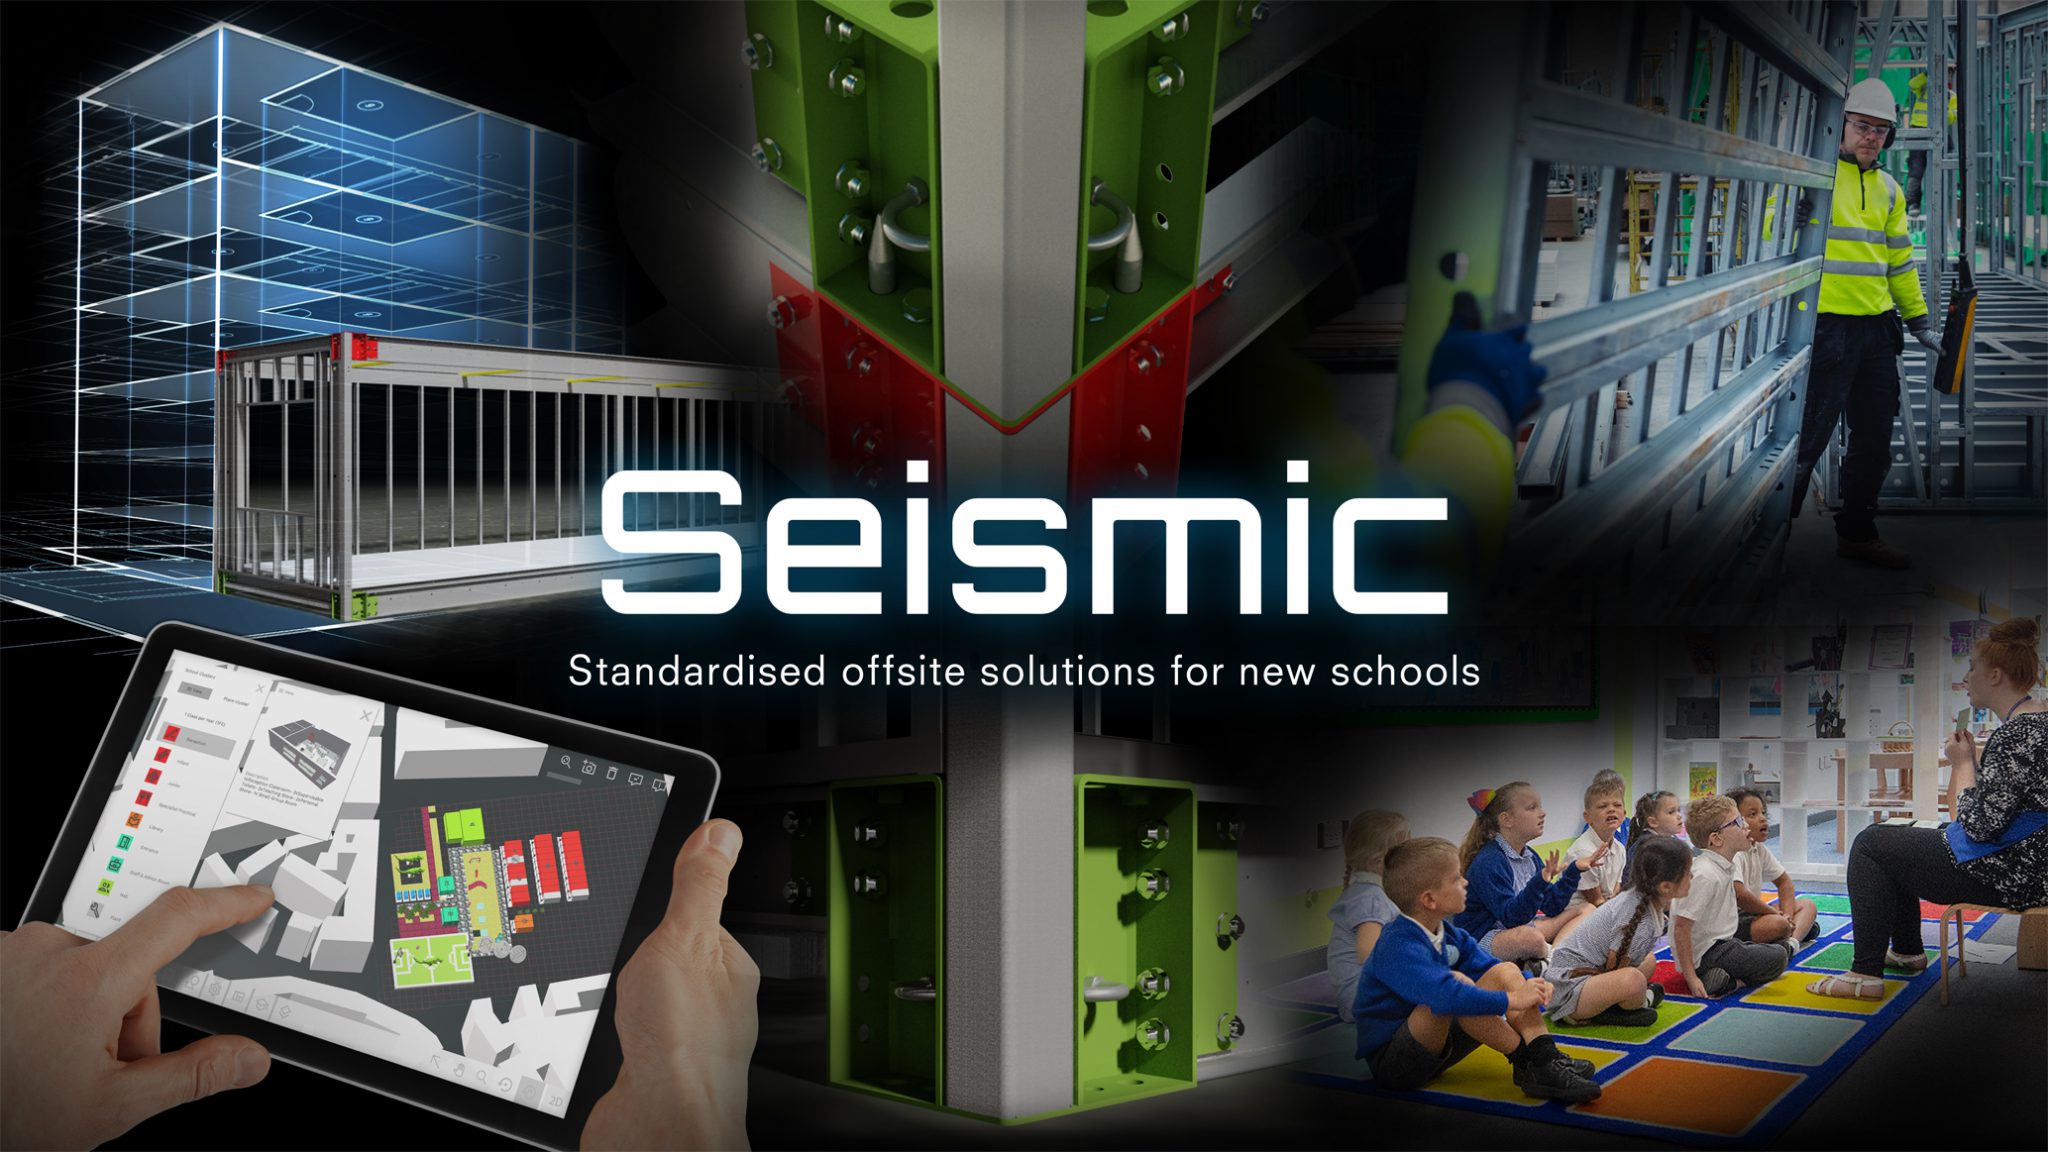 CE member blacc launches ground-breaking Seismic initiative